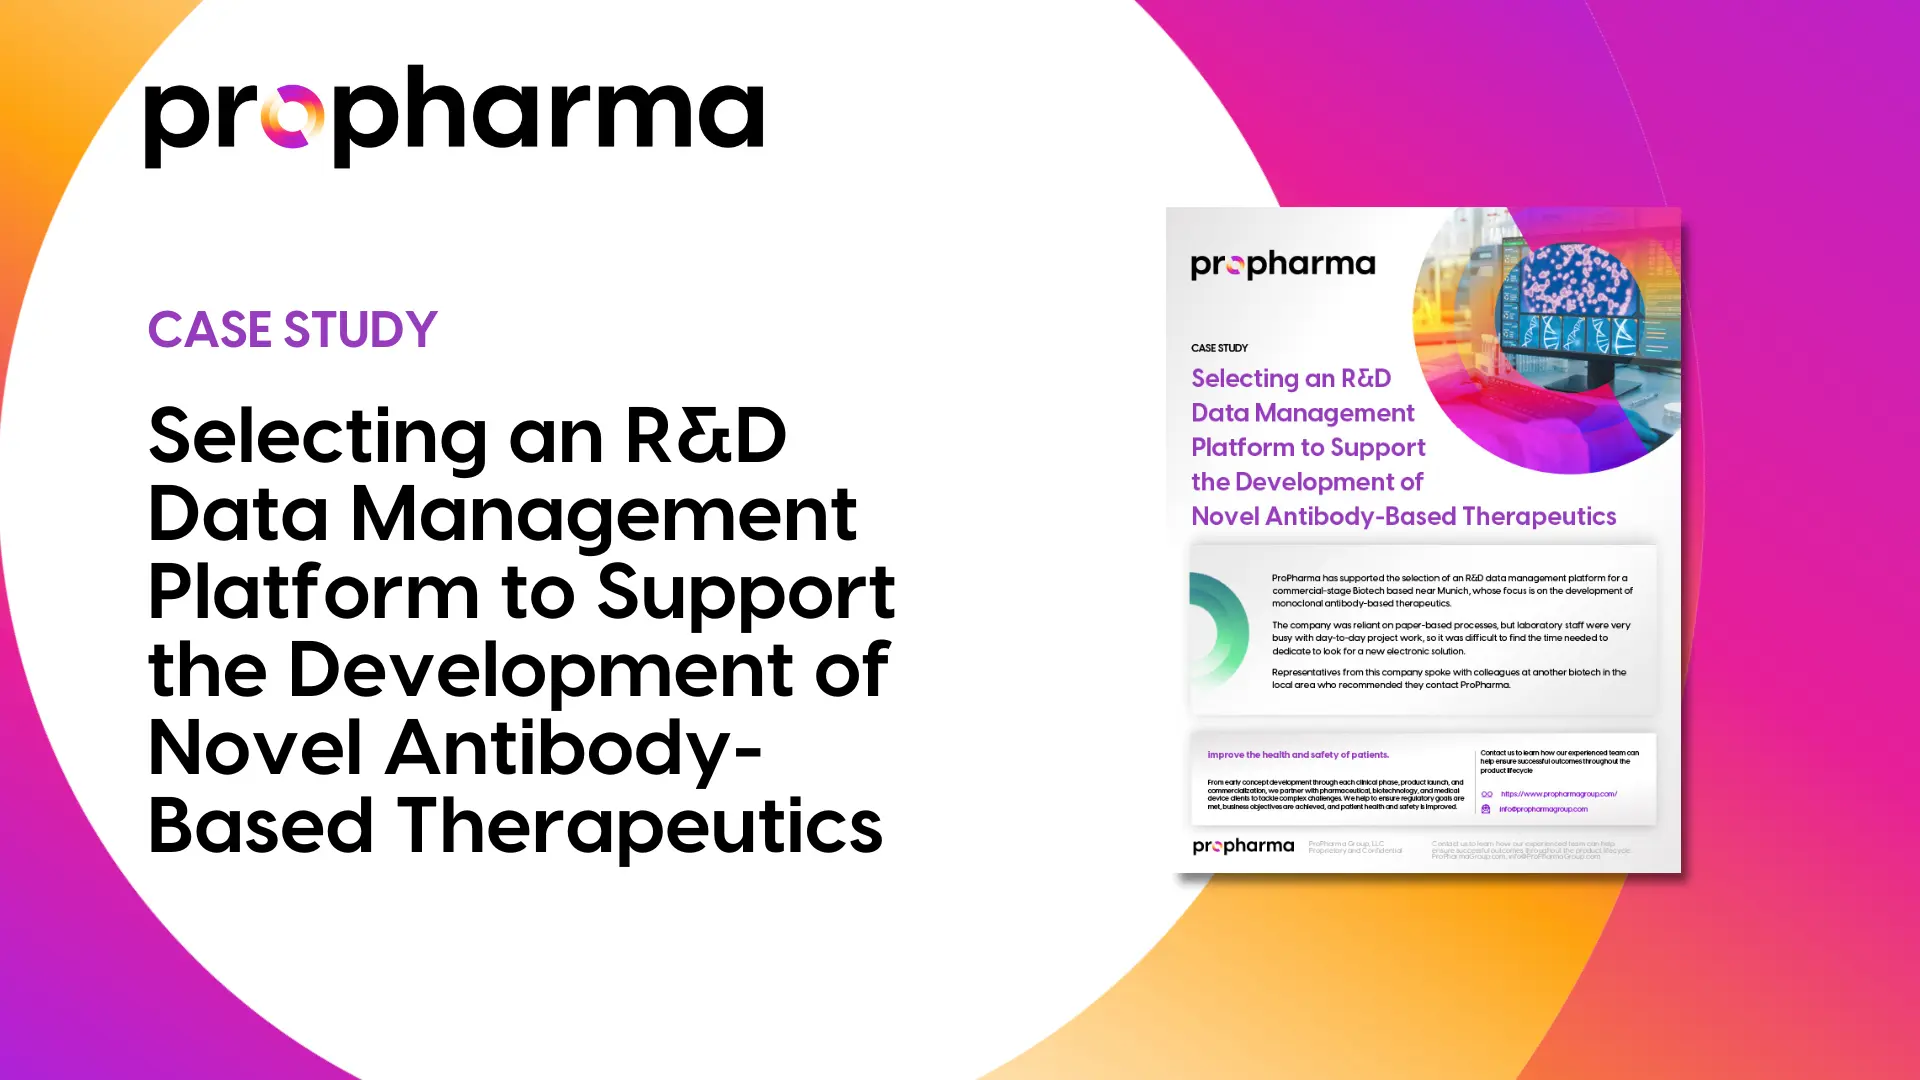 Selecting an R&D Data Management Platform to Support the Development of Novel Antibody-Based Therapeutics